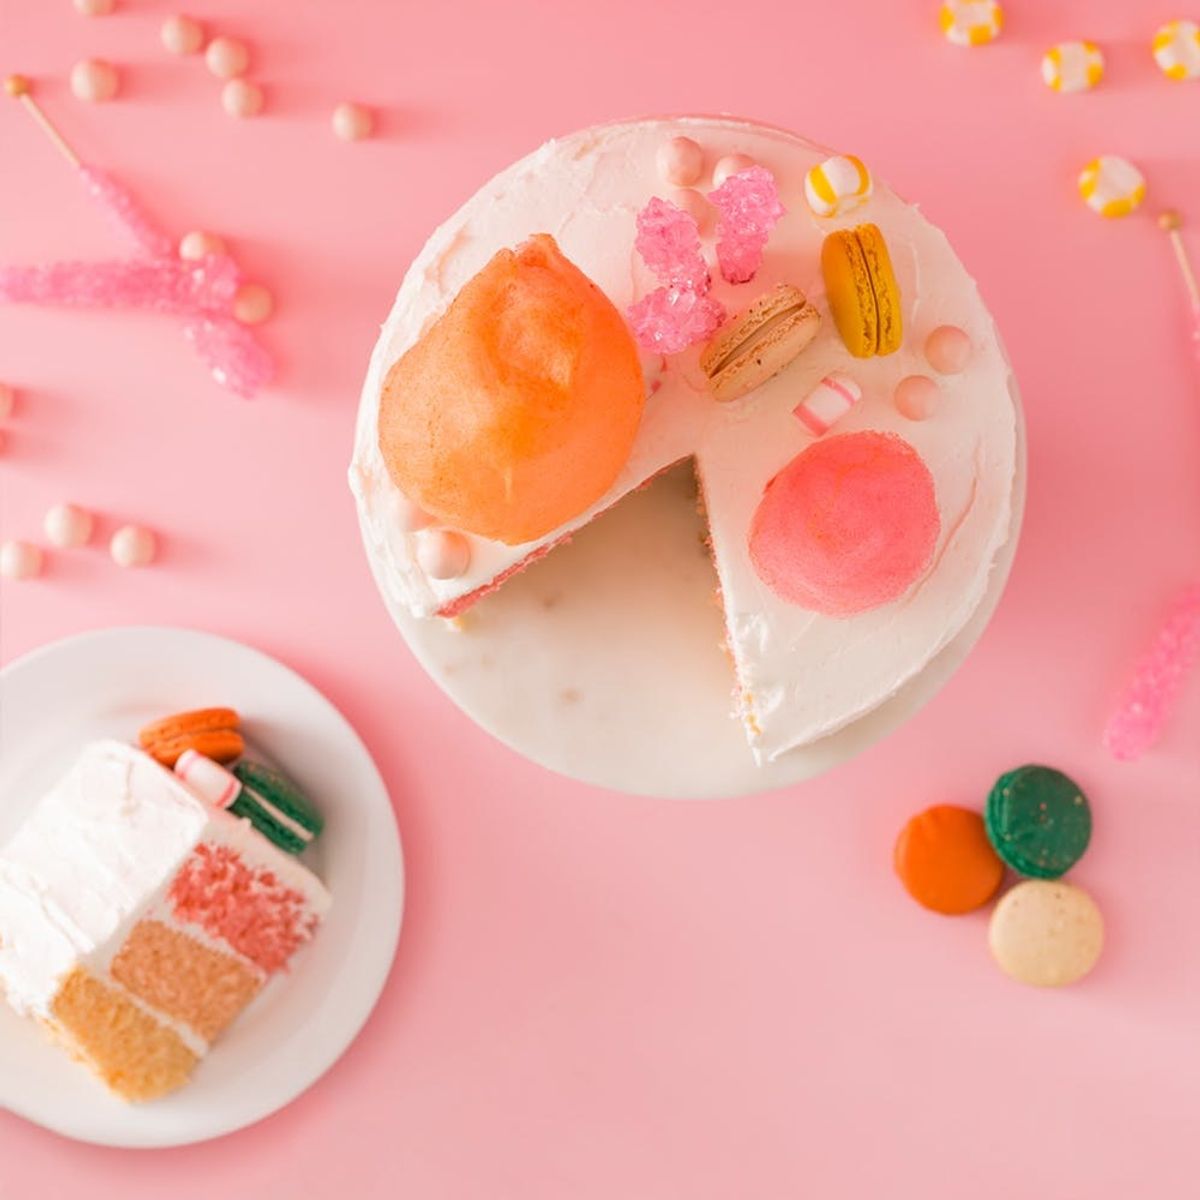 Show Up Your Siblings With This Next-Level Mother’s Day Cake Recipe